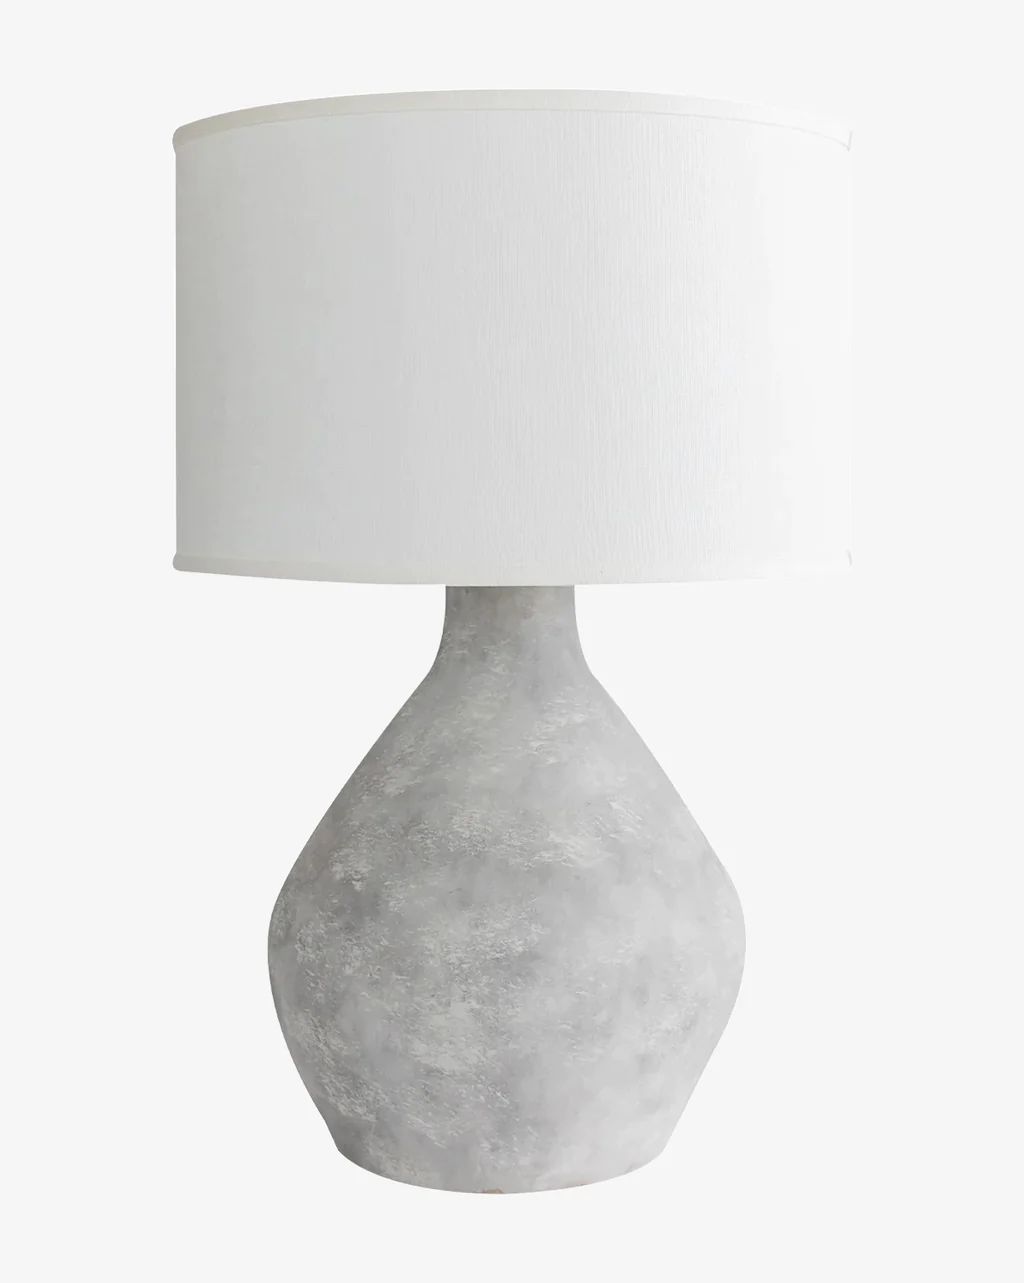 Stetson Table Lamp | McGee & Co.